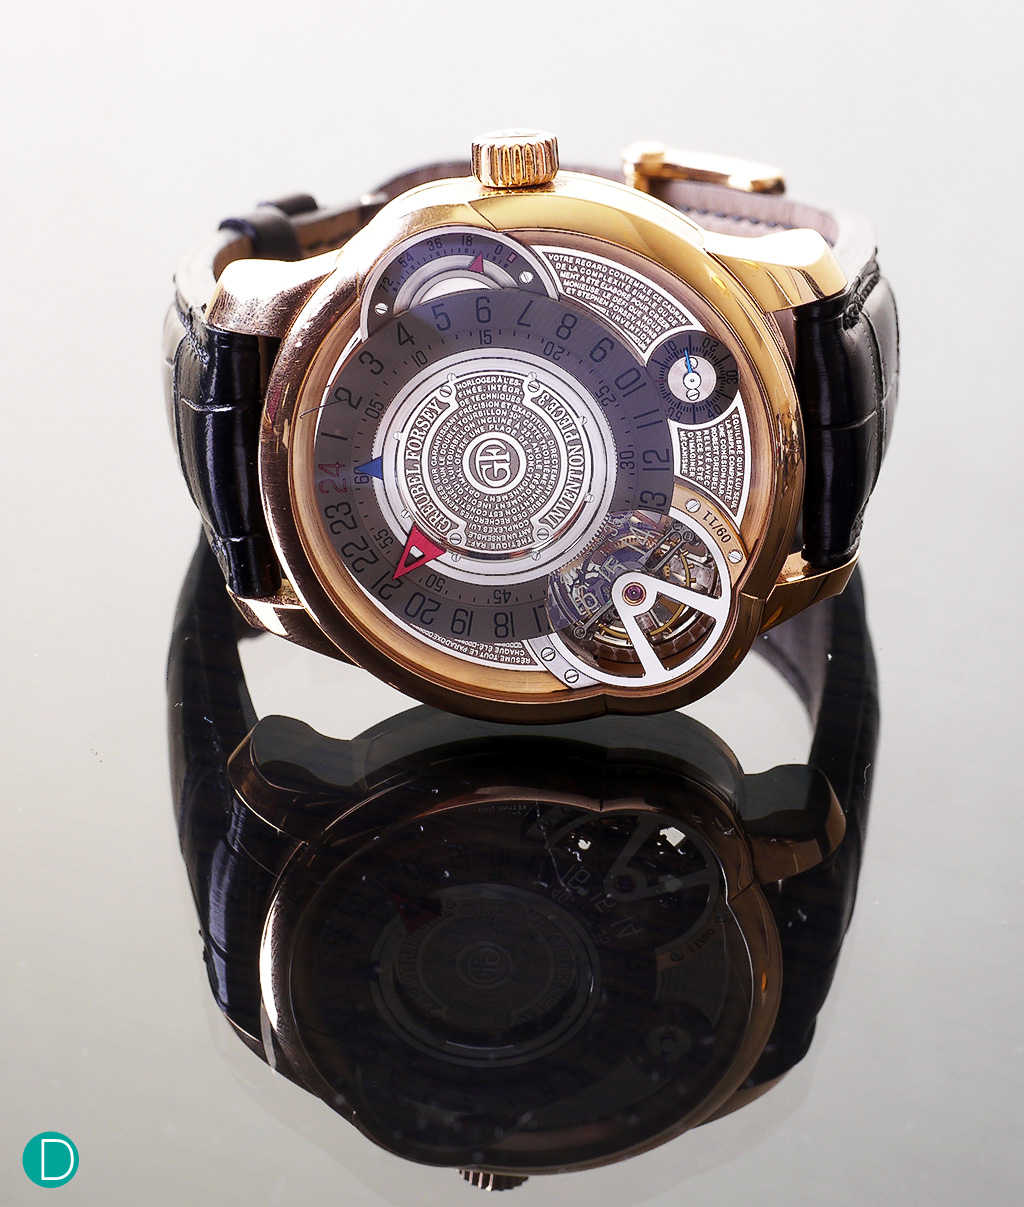 Greubel Forsey Invention Piece 3. The watch is rather more discrete than one would initially imagine with the unorthodox design of the dial, and the tourbillon sticking out as a buldge in the case side. A curved sapphire glass is placed on the buldge to allow the incline tourbillon to be visible from the side.